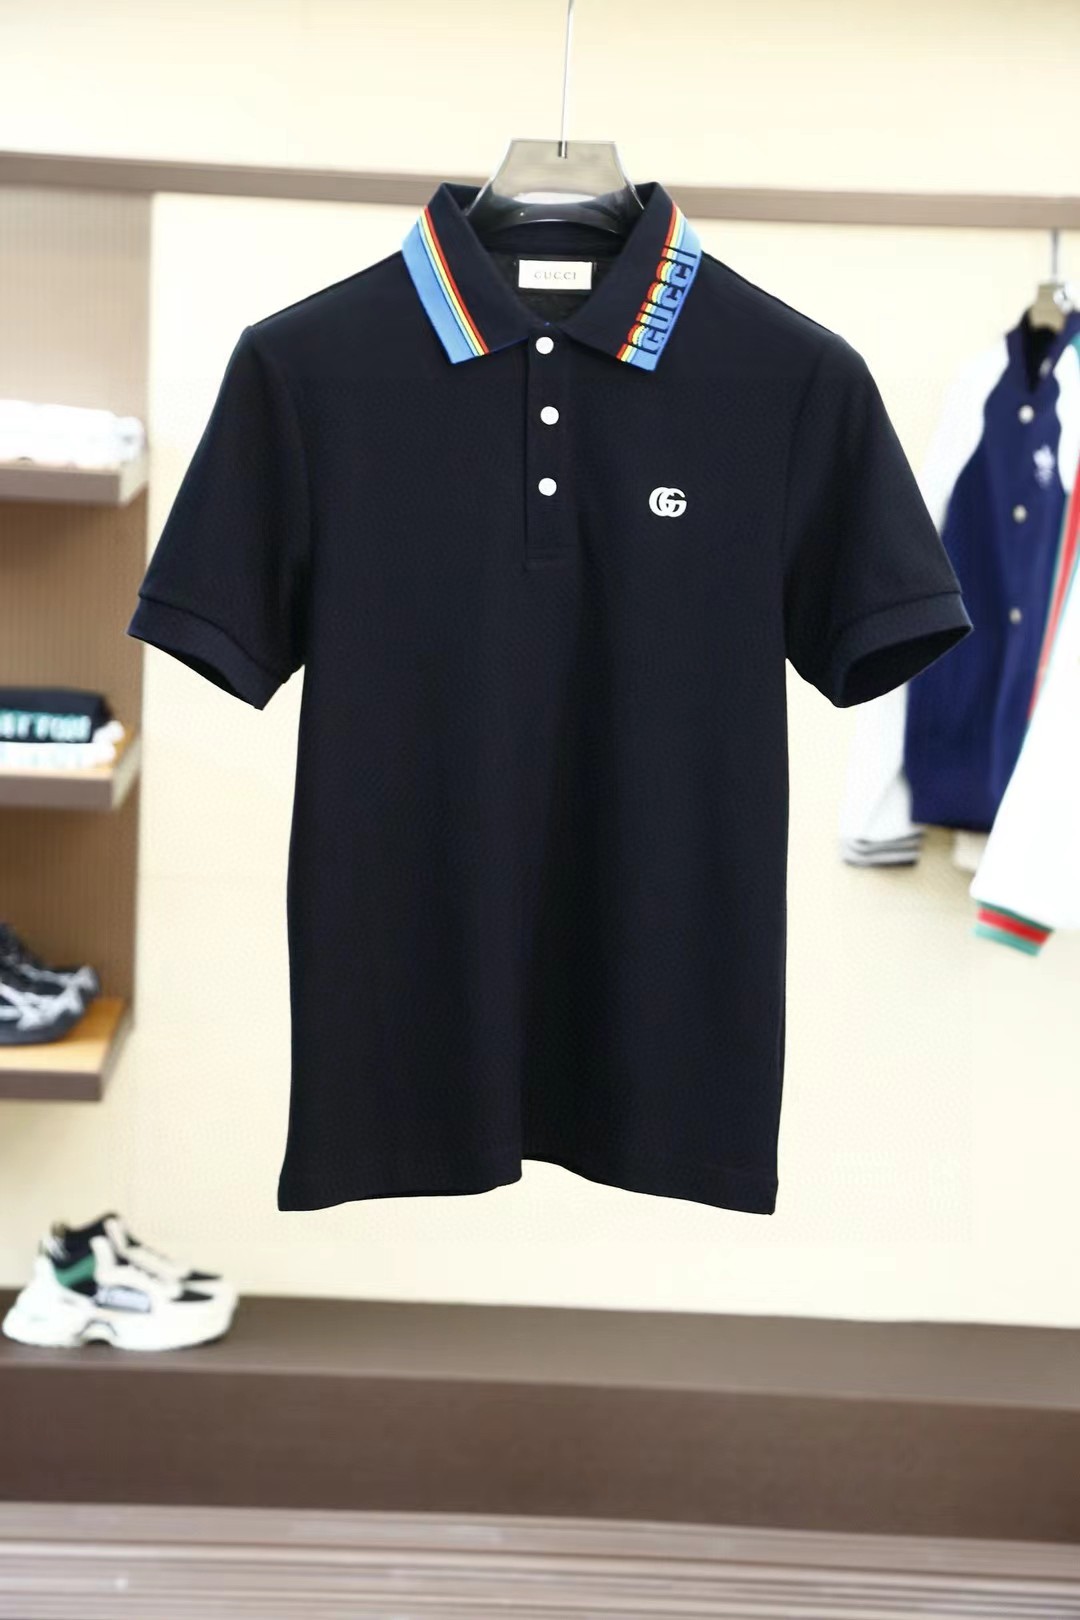 What
 Gucci Clothing Polo T-Shirt Designer High Replica
 Black Blue White Embroidery Men Cotton Knitting Summer Collection Short Sleeve